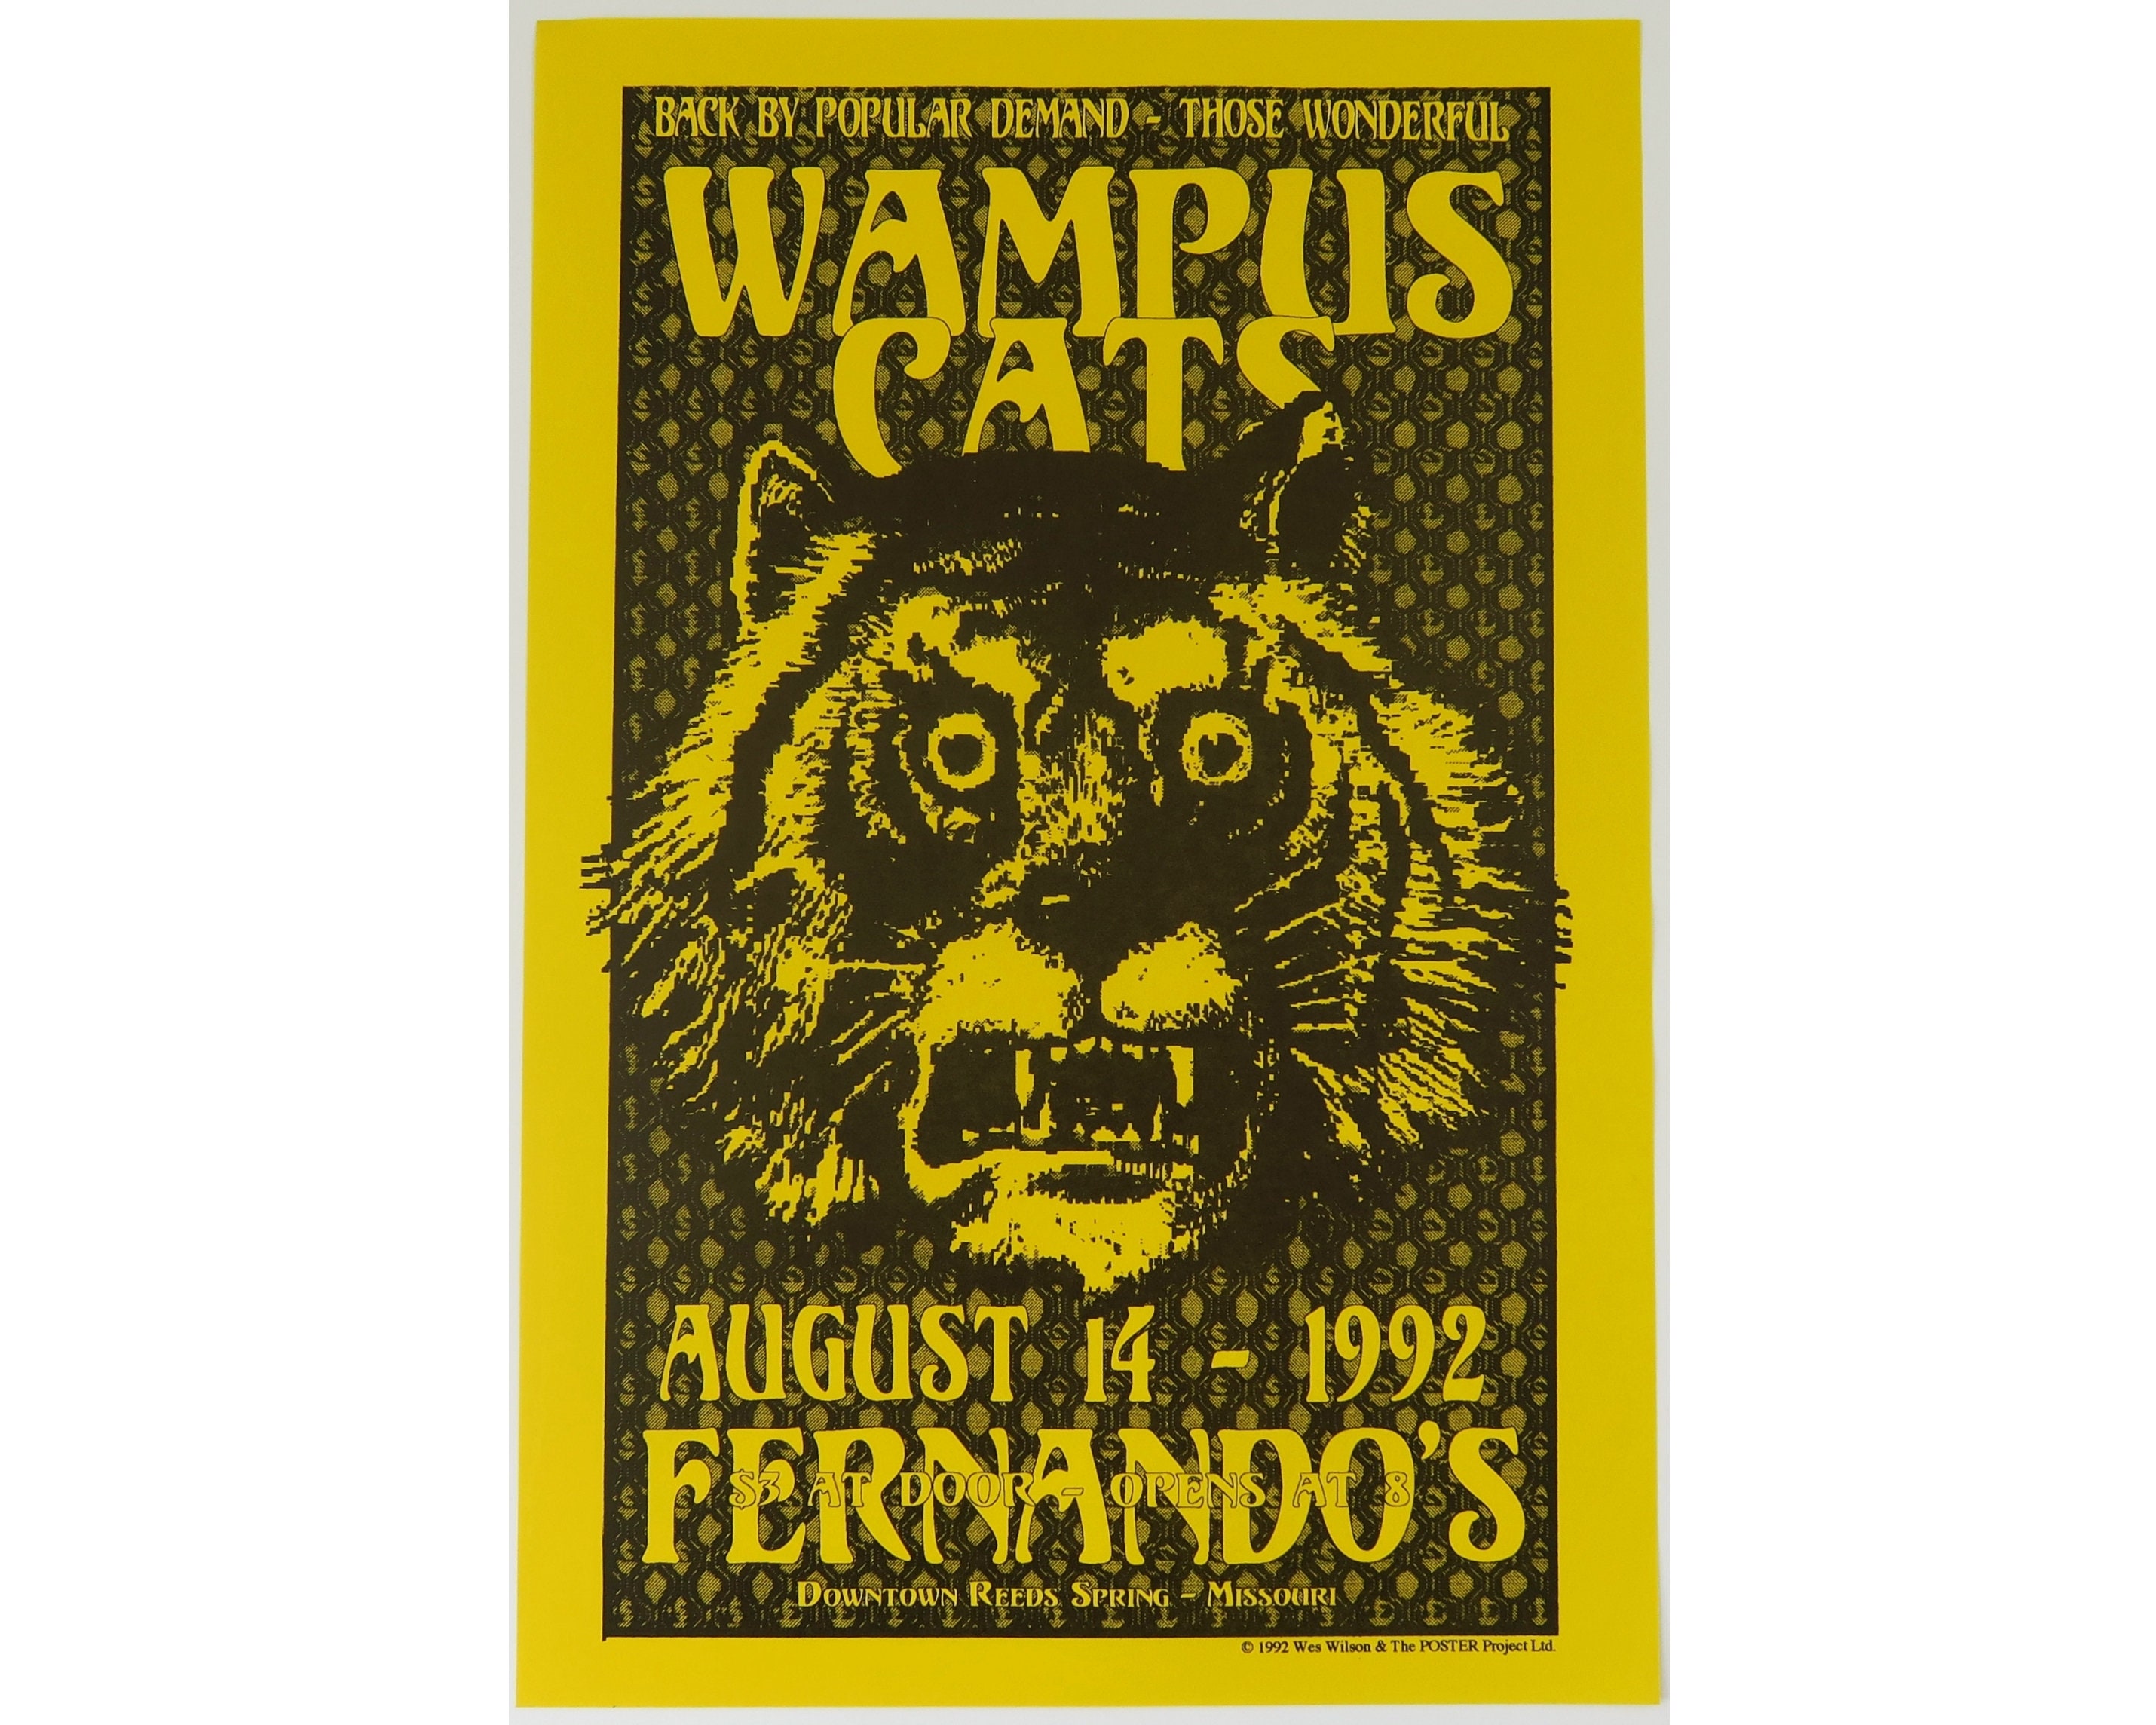 Wampus Cats at Fernando's - Reeds Spring, MO - August 14, 1992 - Wes Wilson Poster Project - Ozarks Music